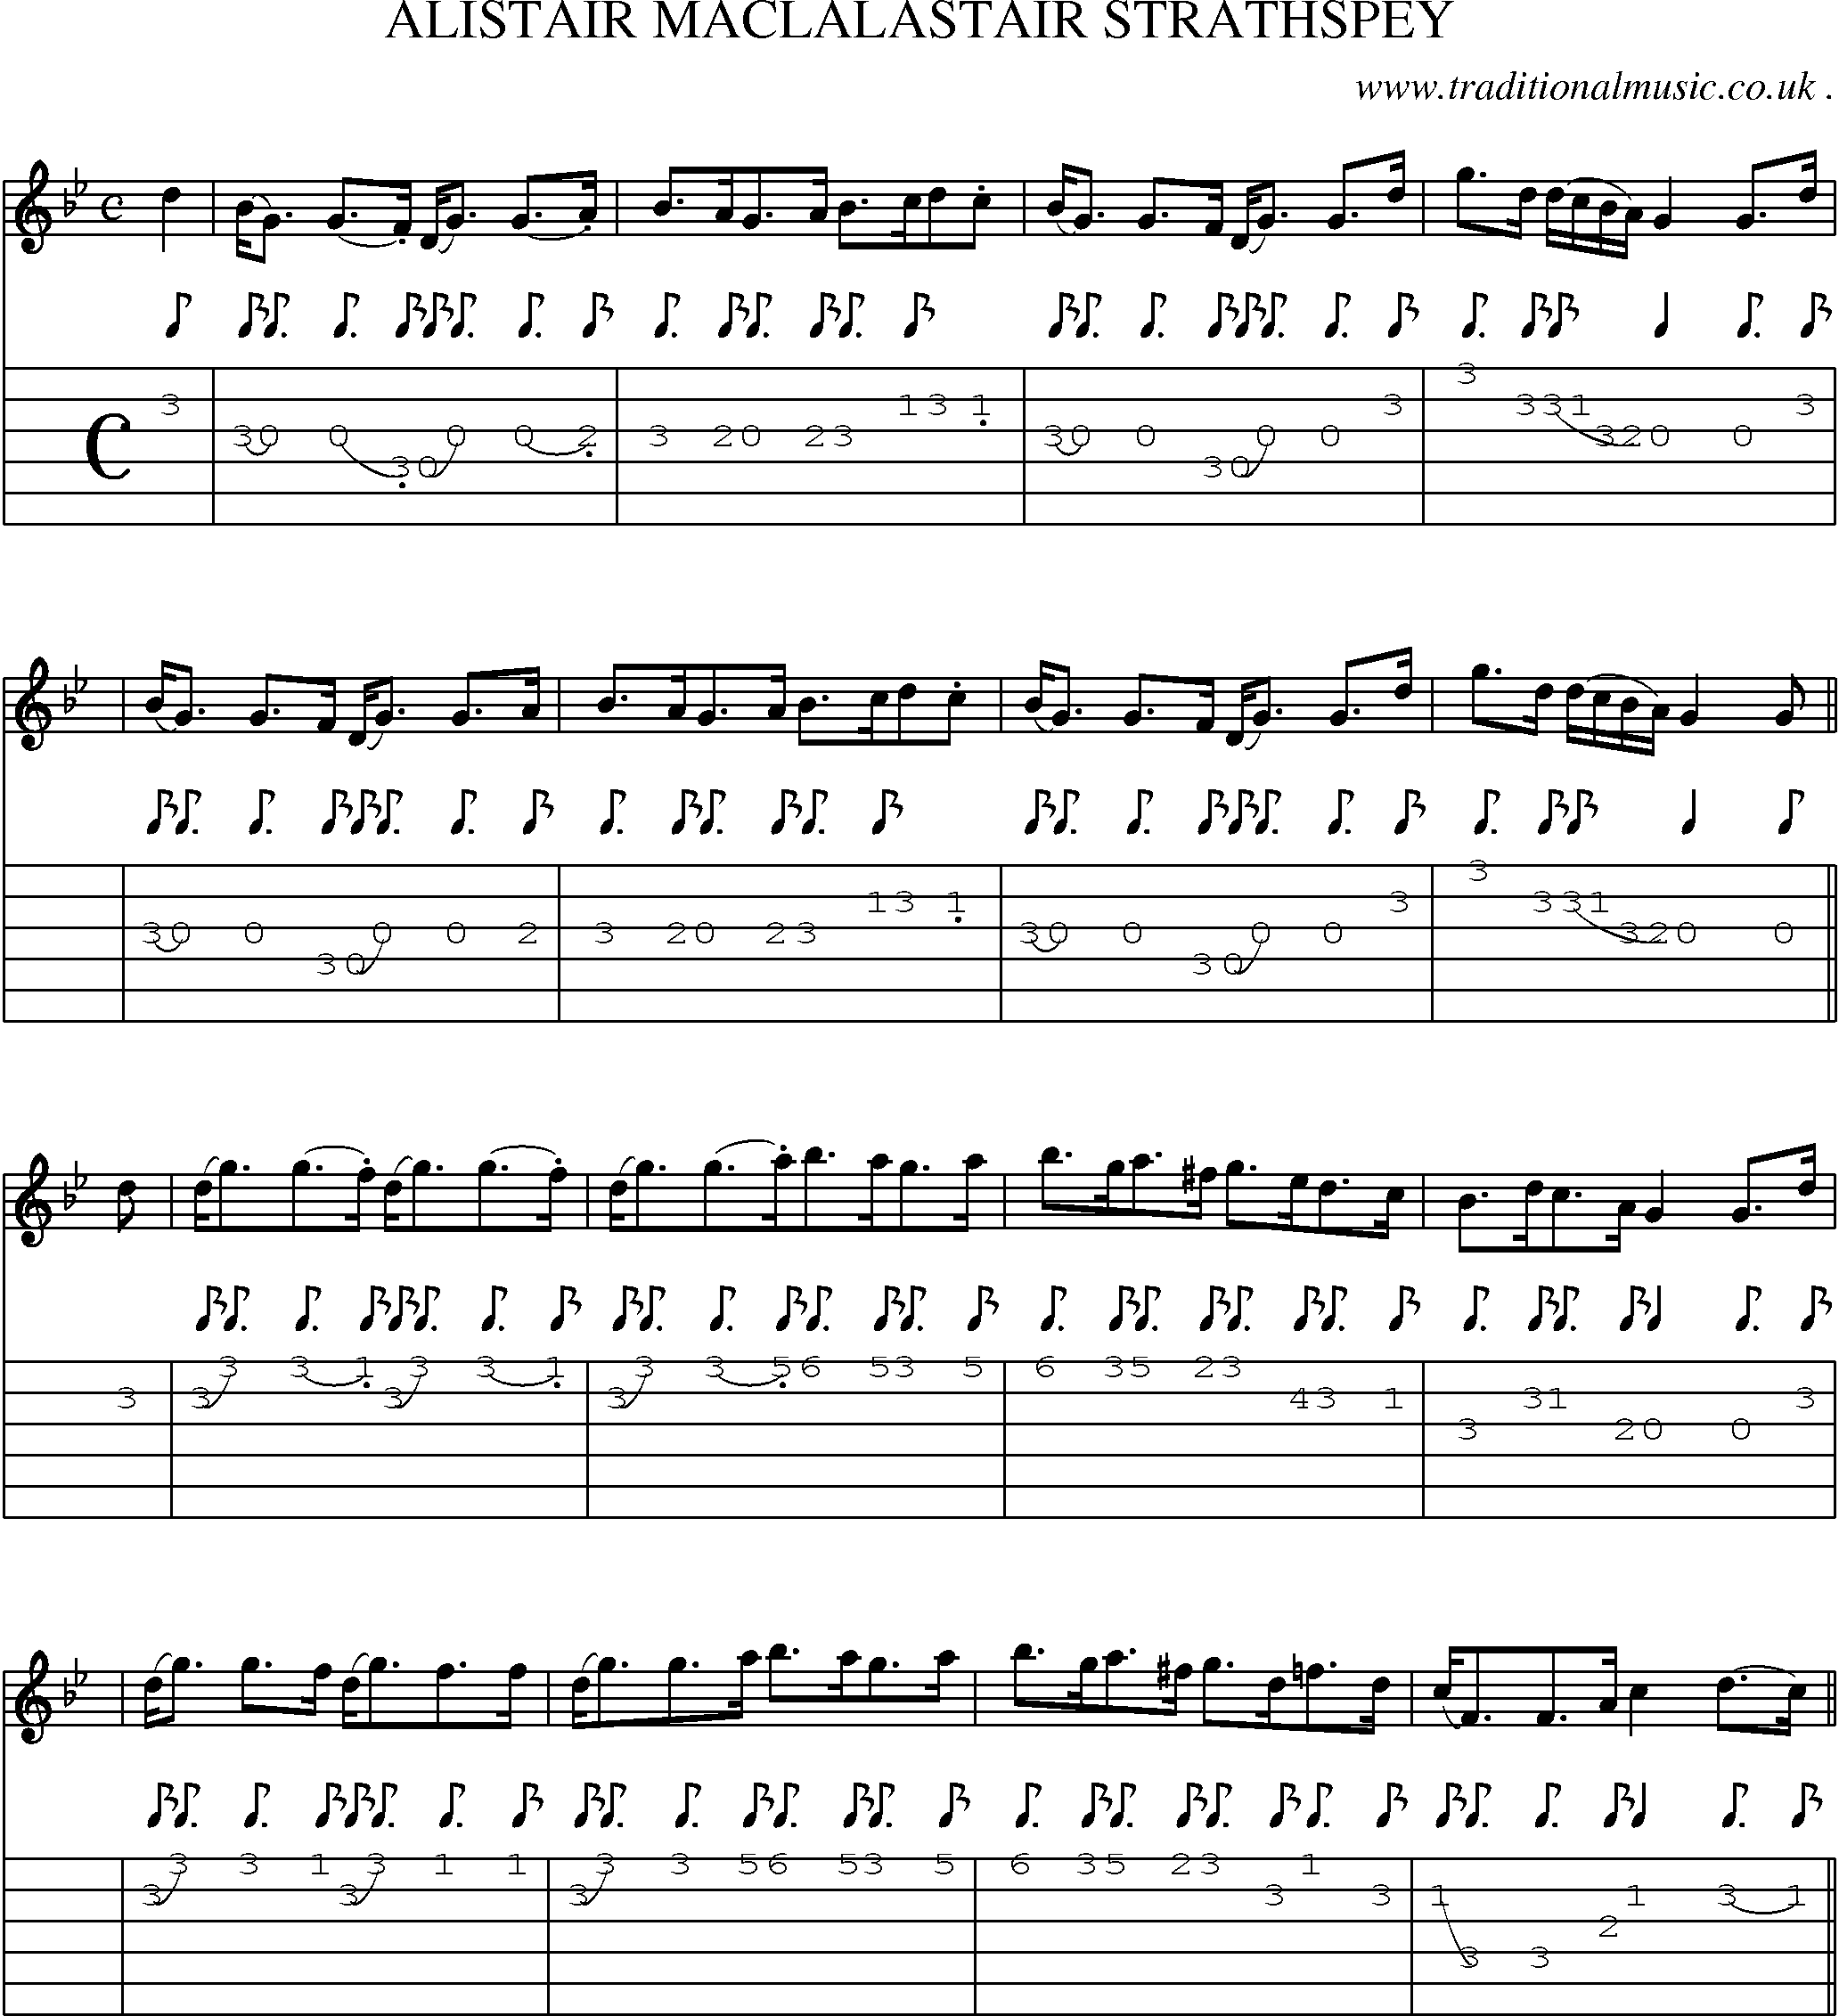 Sheet-Music and Guitar Tabs for Alistair Maclalastair Strathspey